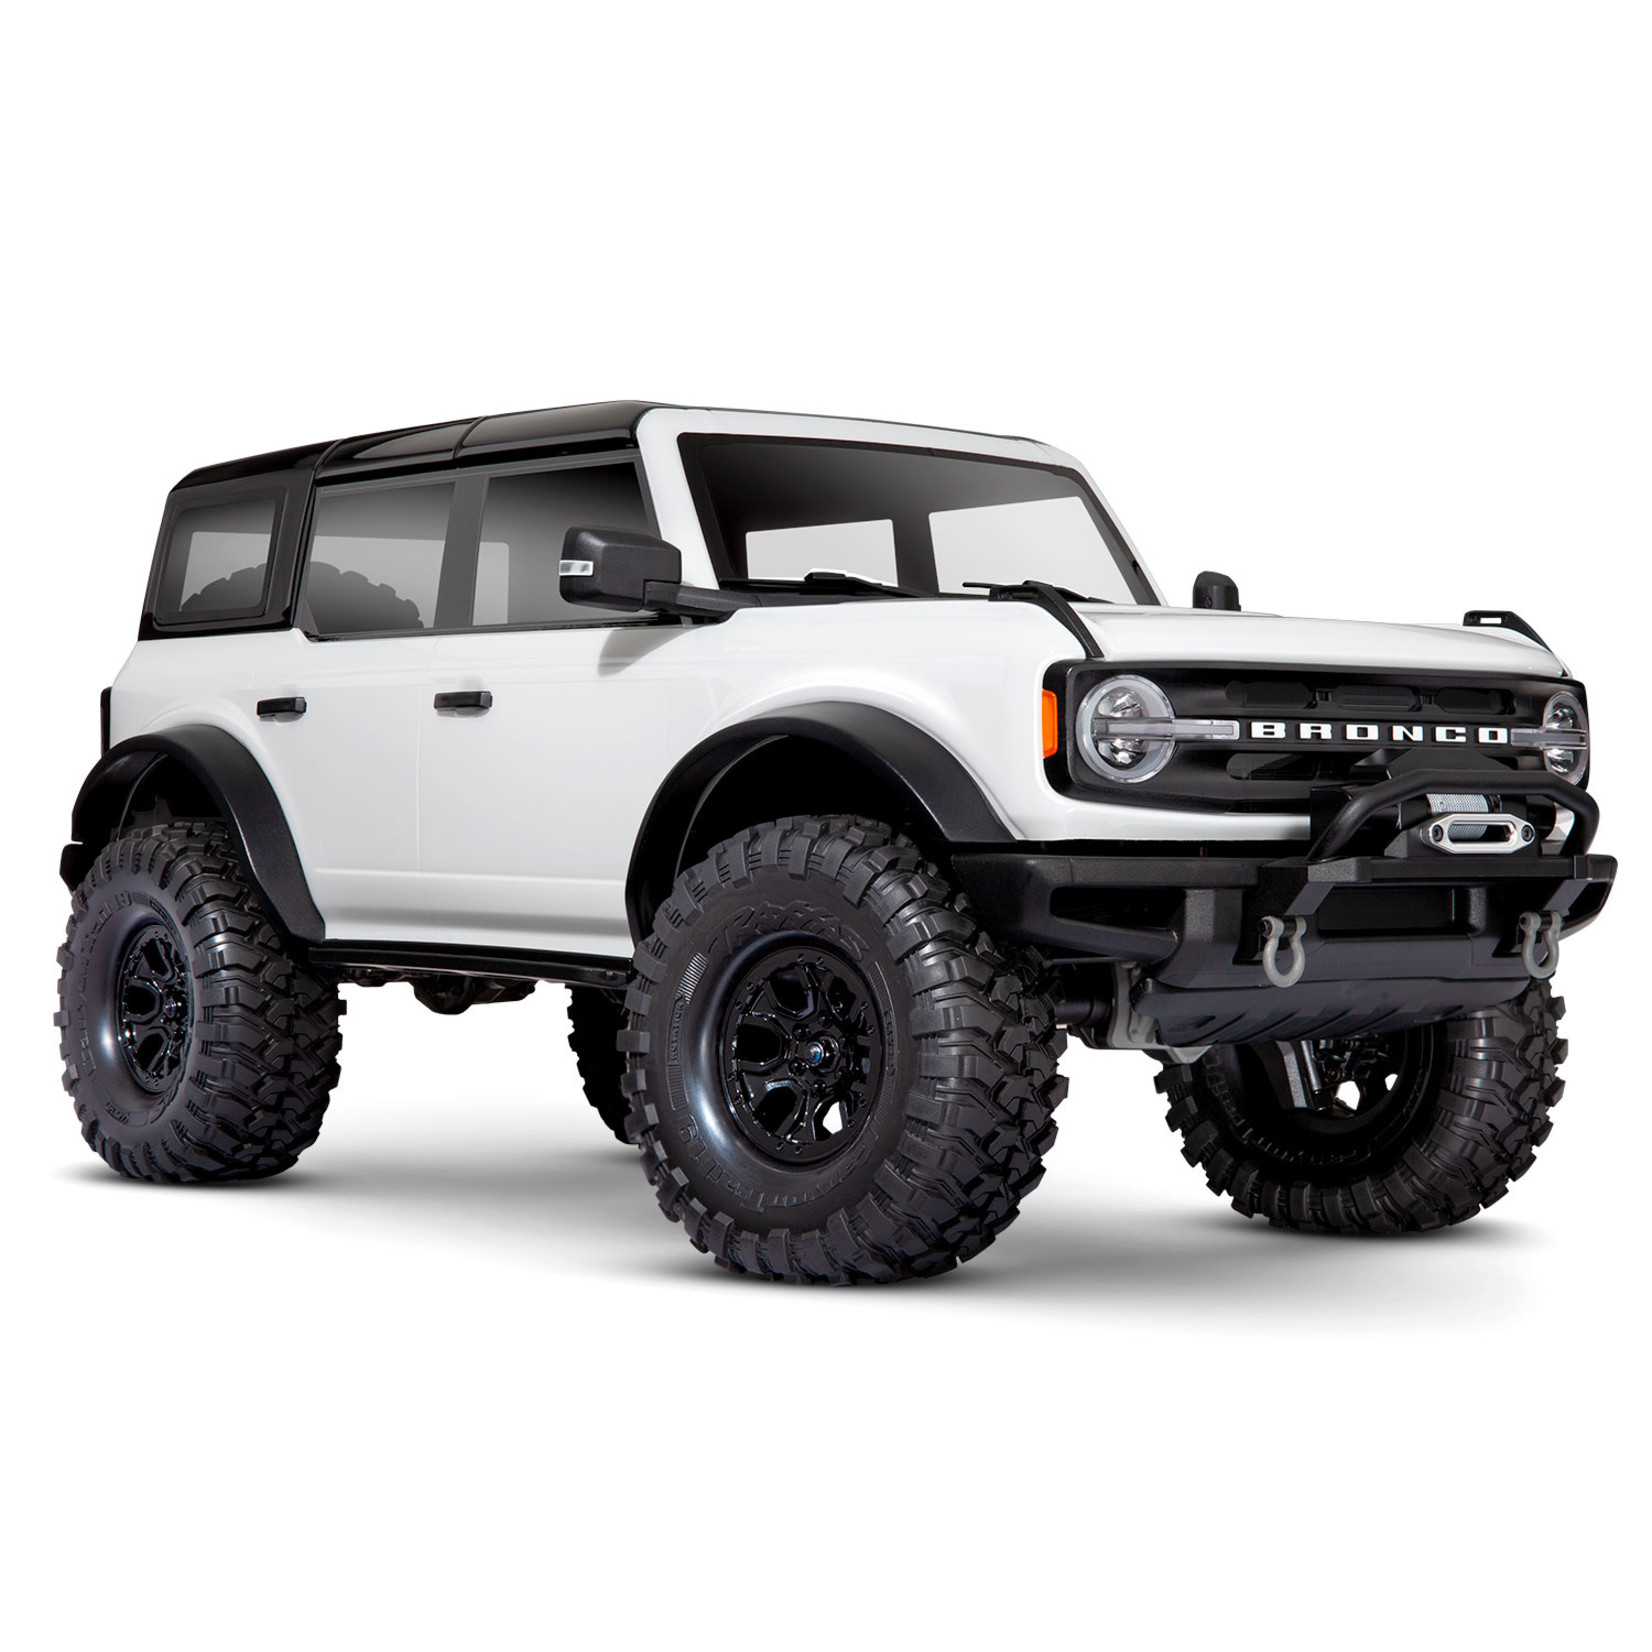 Traxxas TRX-4 Scale and Trail Crawler with 2021 Ford Bronco Body: 1/10 Scale 4WD Electric Trail Truck